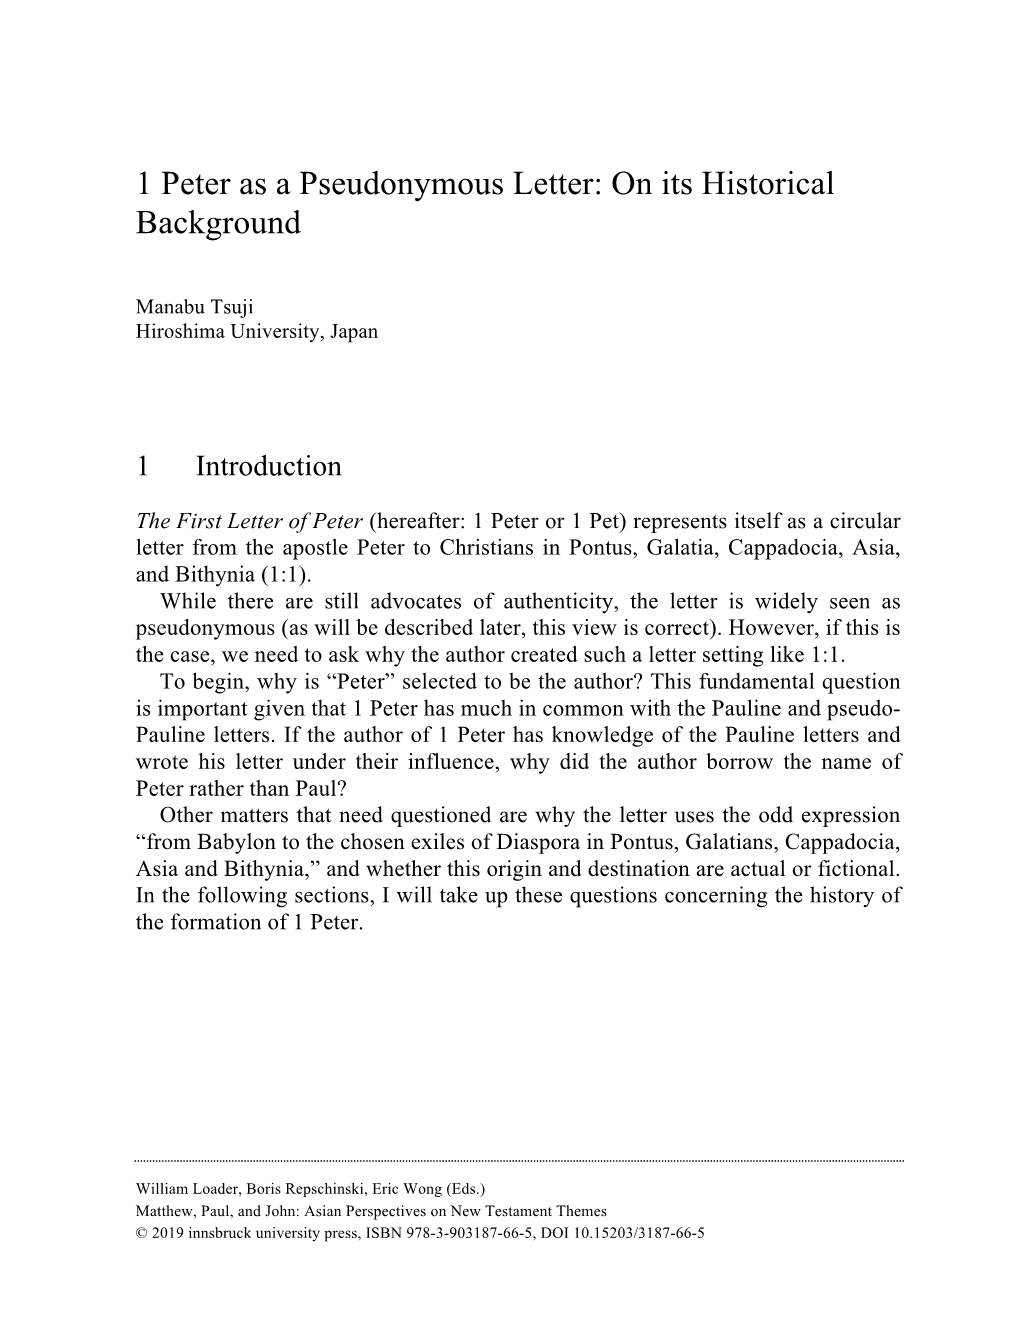 1 Peter As a Pseudonymous Letter: on Its Historical Background